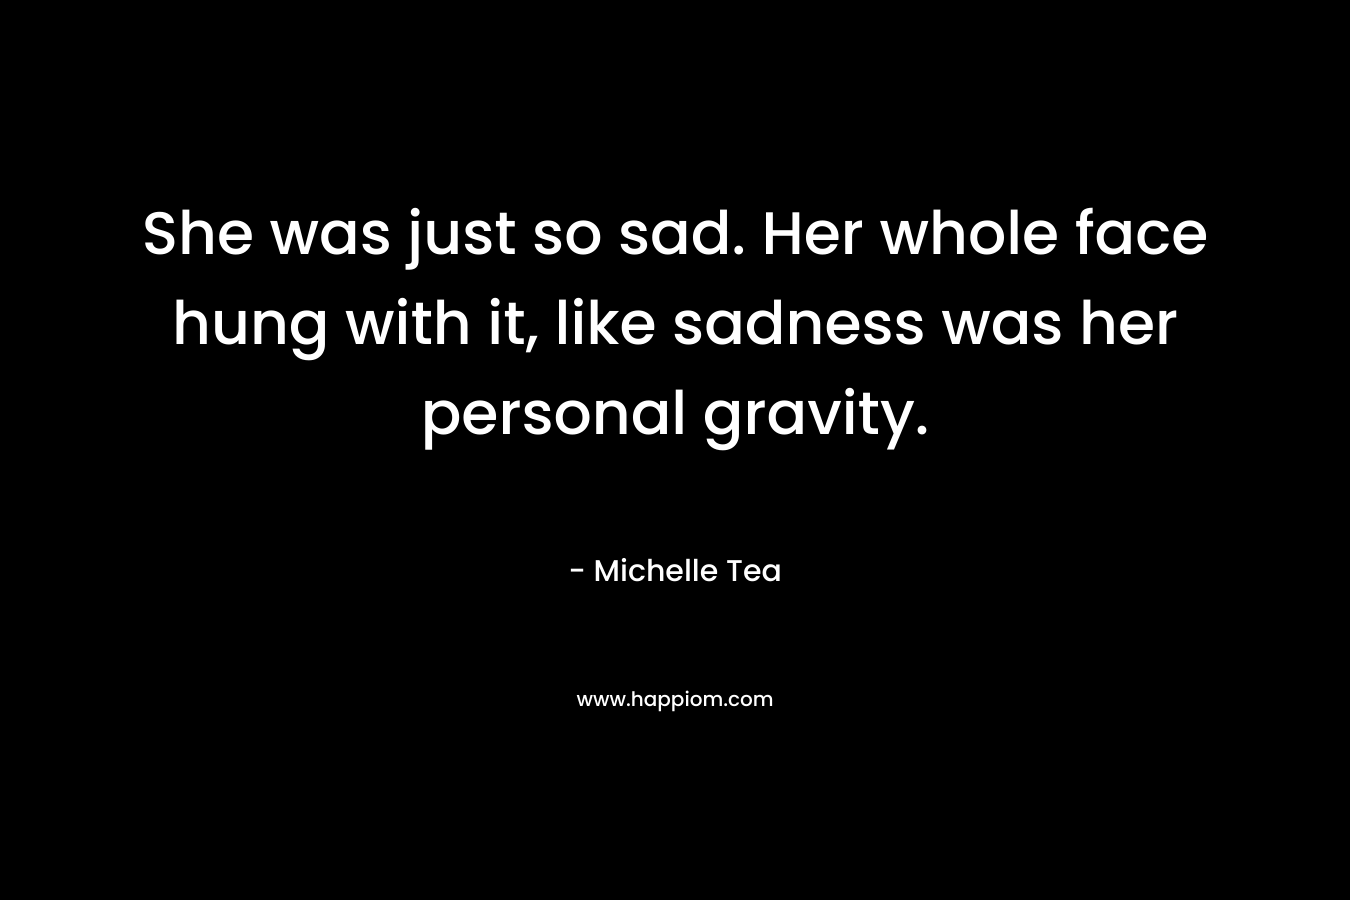 She was just so sad. Her whole face hung with it, like sadness was her personal gravity.